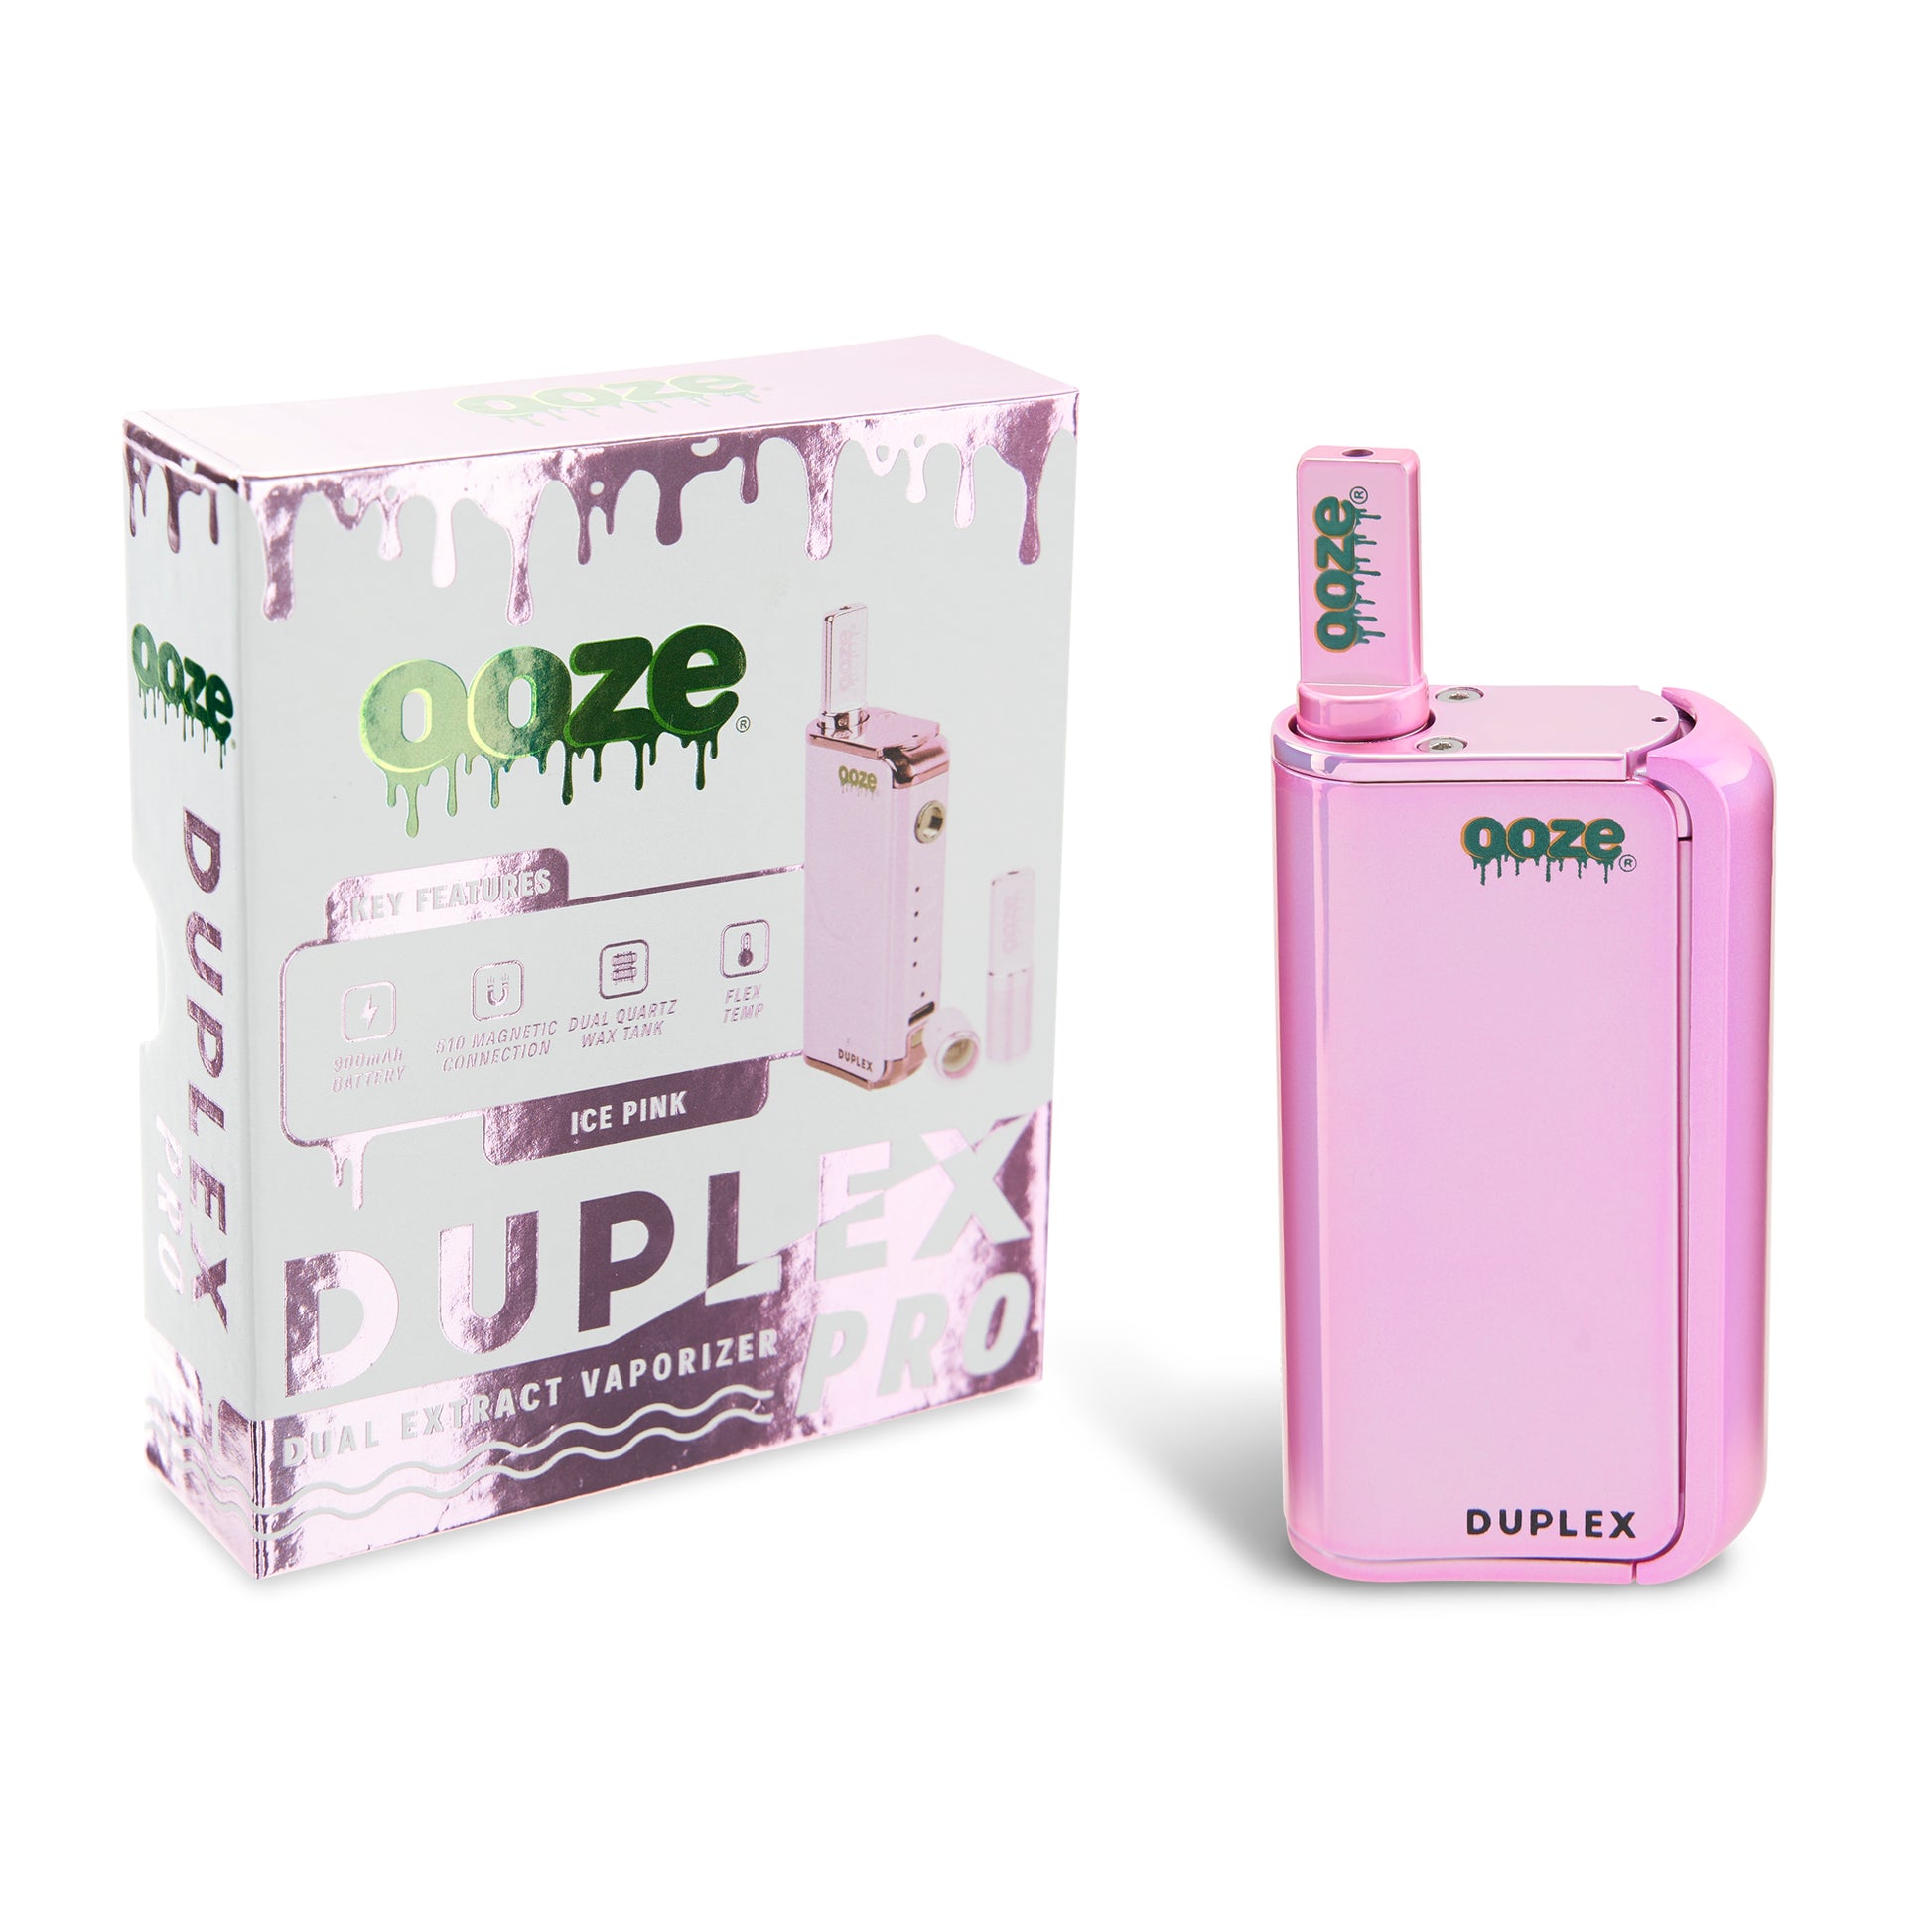 The Ice Pink Ooze Duplex Pro Vaporizer is shown next to the packaging with the wax atomizer inserted.